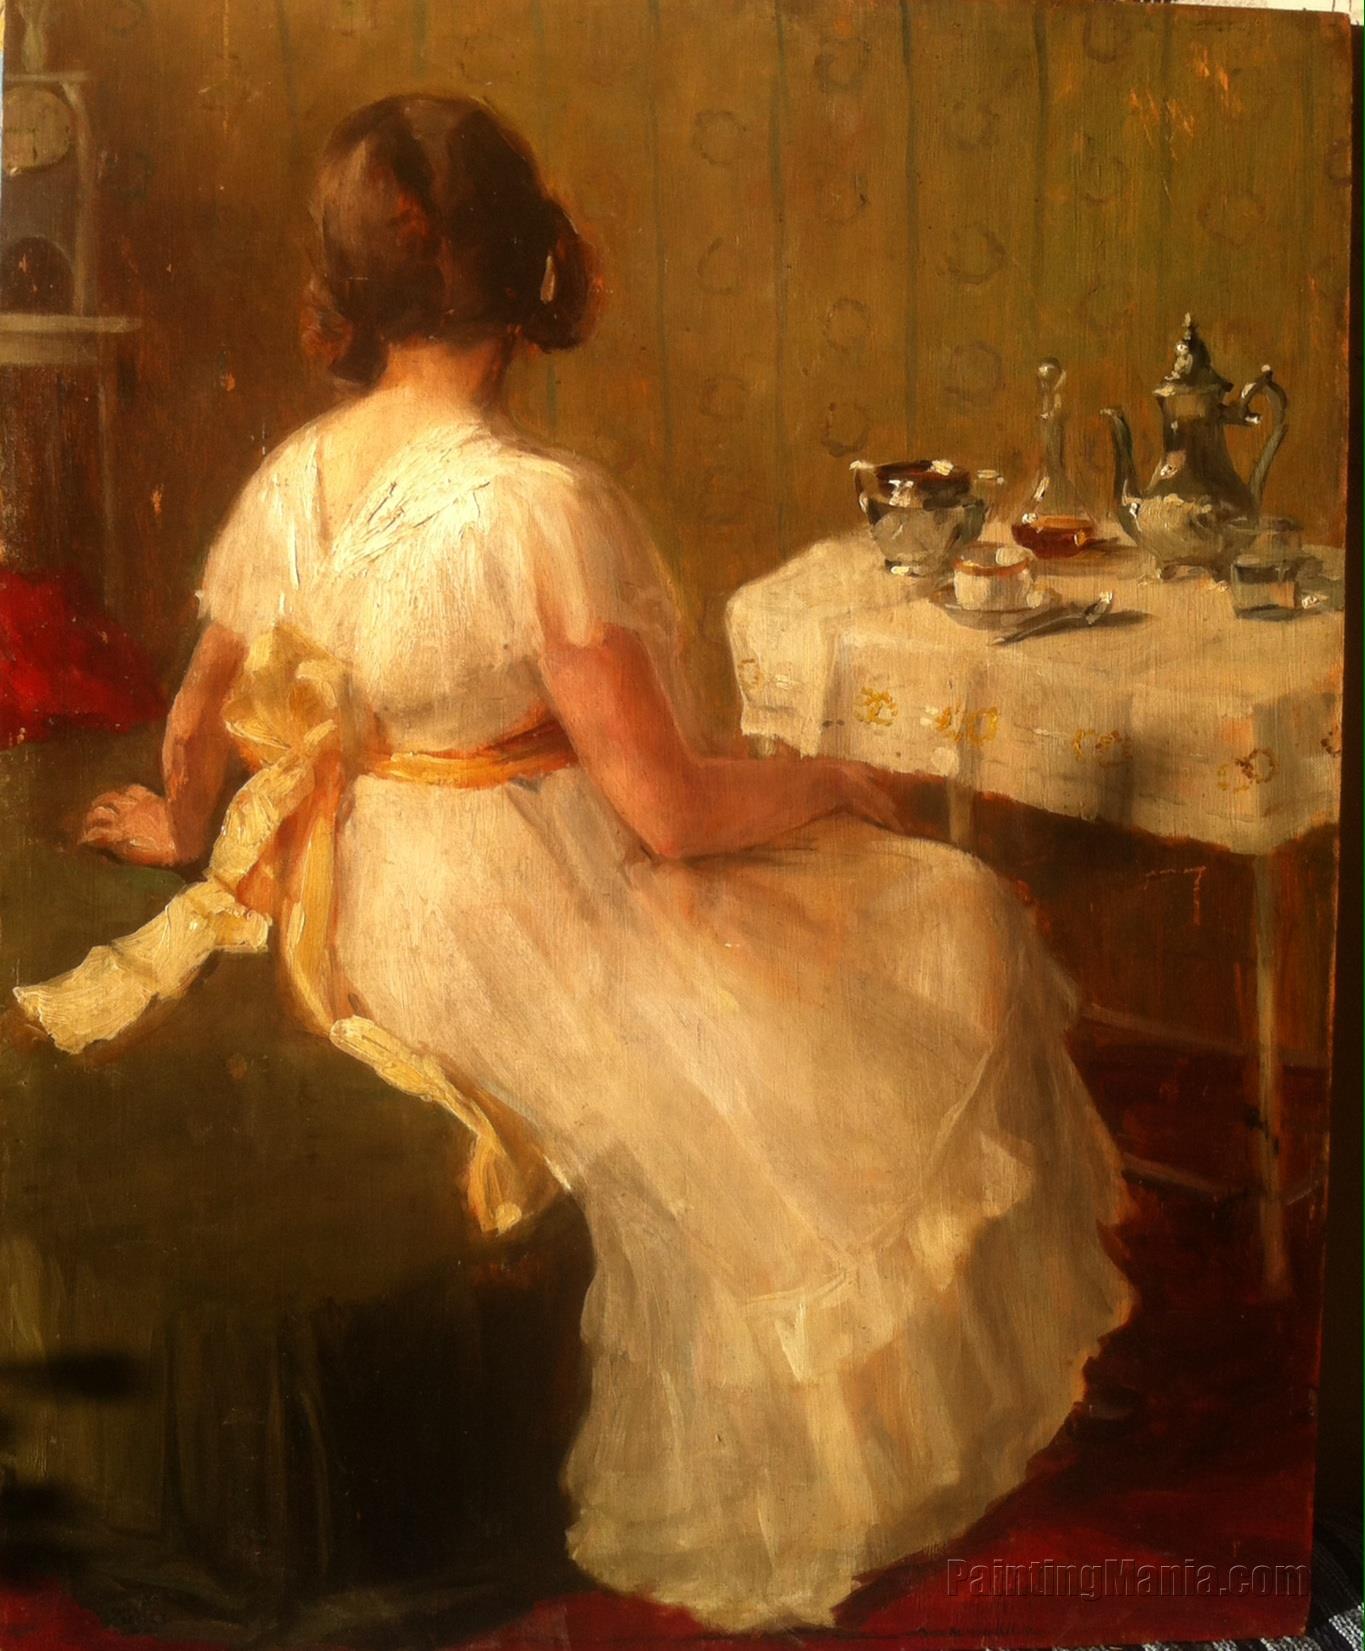 Young Lady at Evening Tea (Waiting for the Evening Tea)